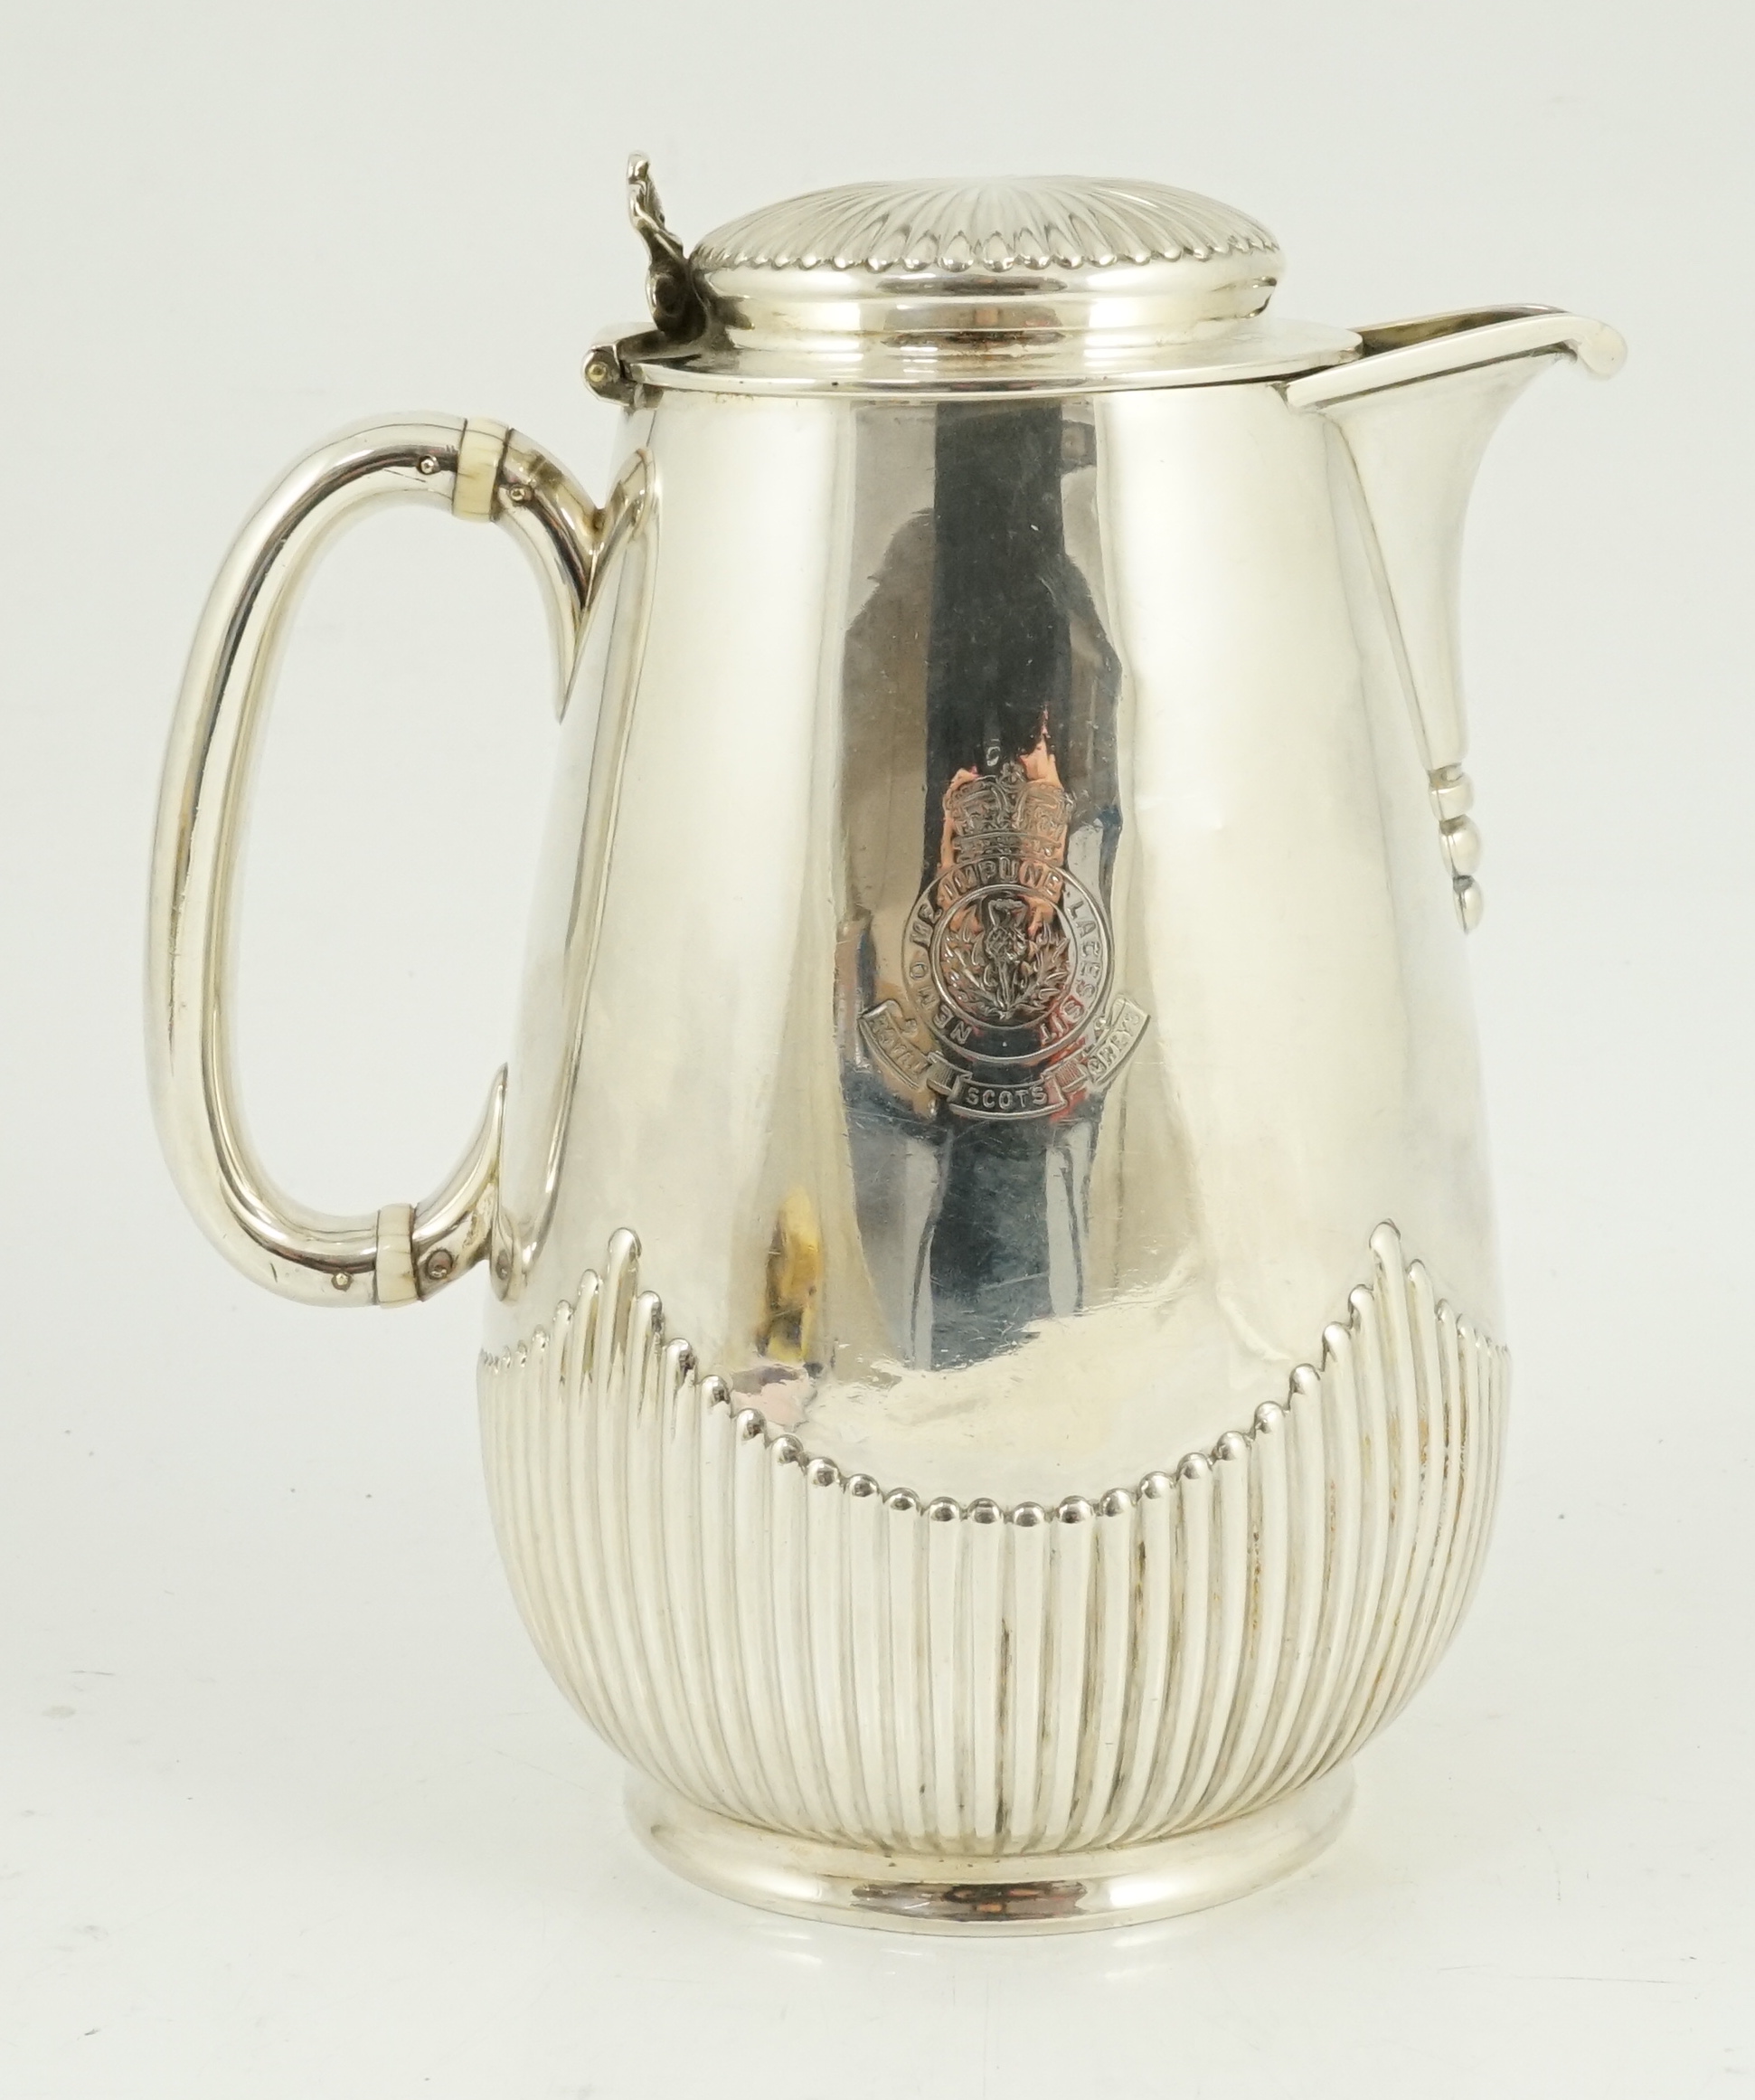 The Royal Scots Greys. A Victorian Scottish silver hotwater pot, Hamilton & Inches, Edinburgh, 1882, - Image 3 of 8